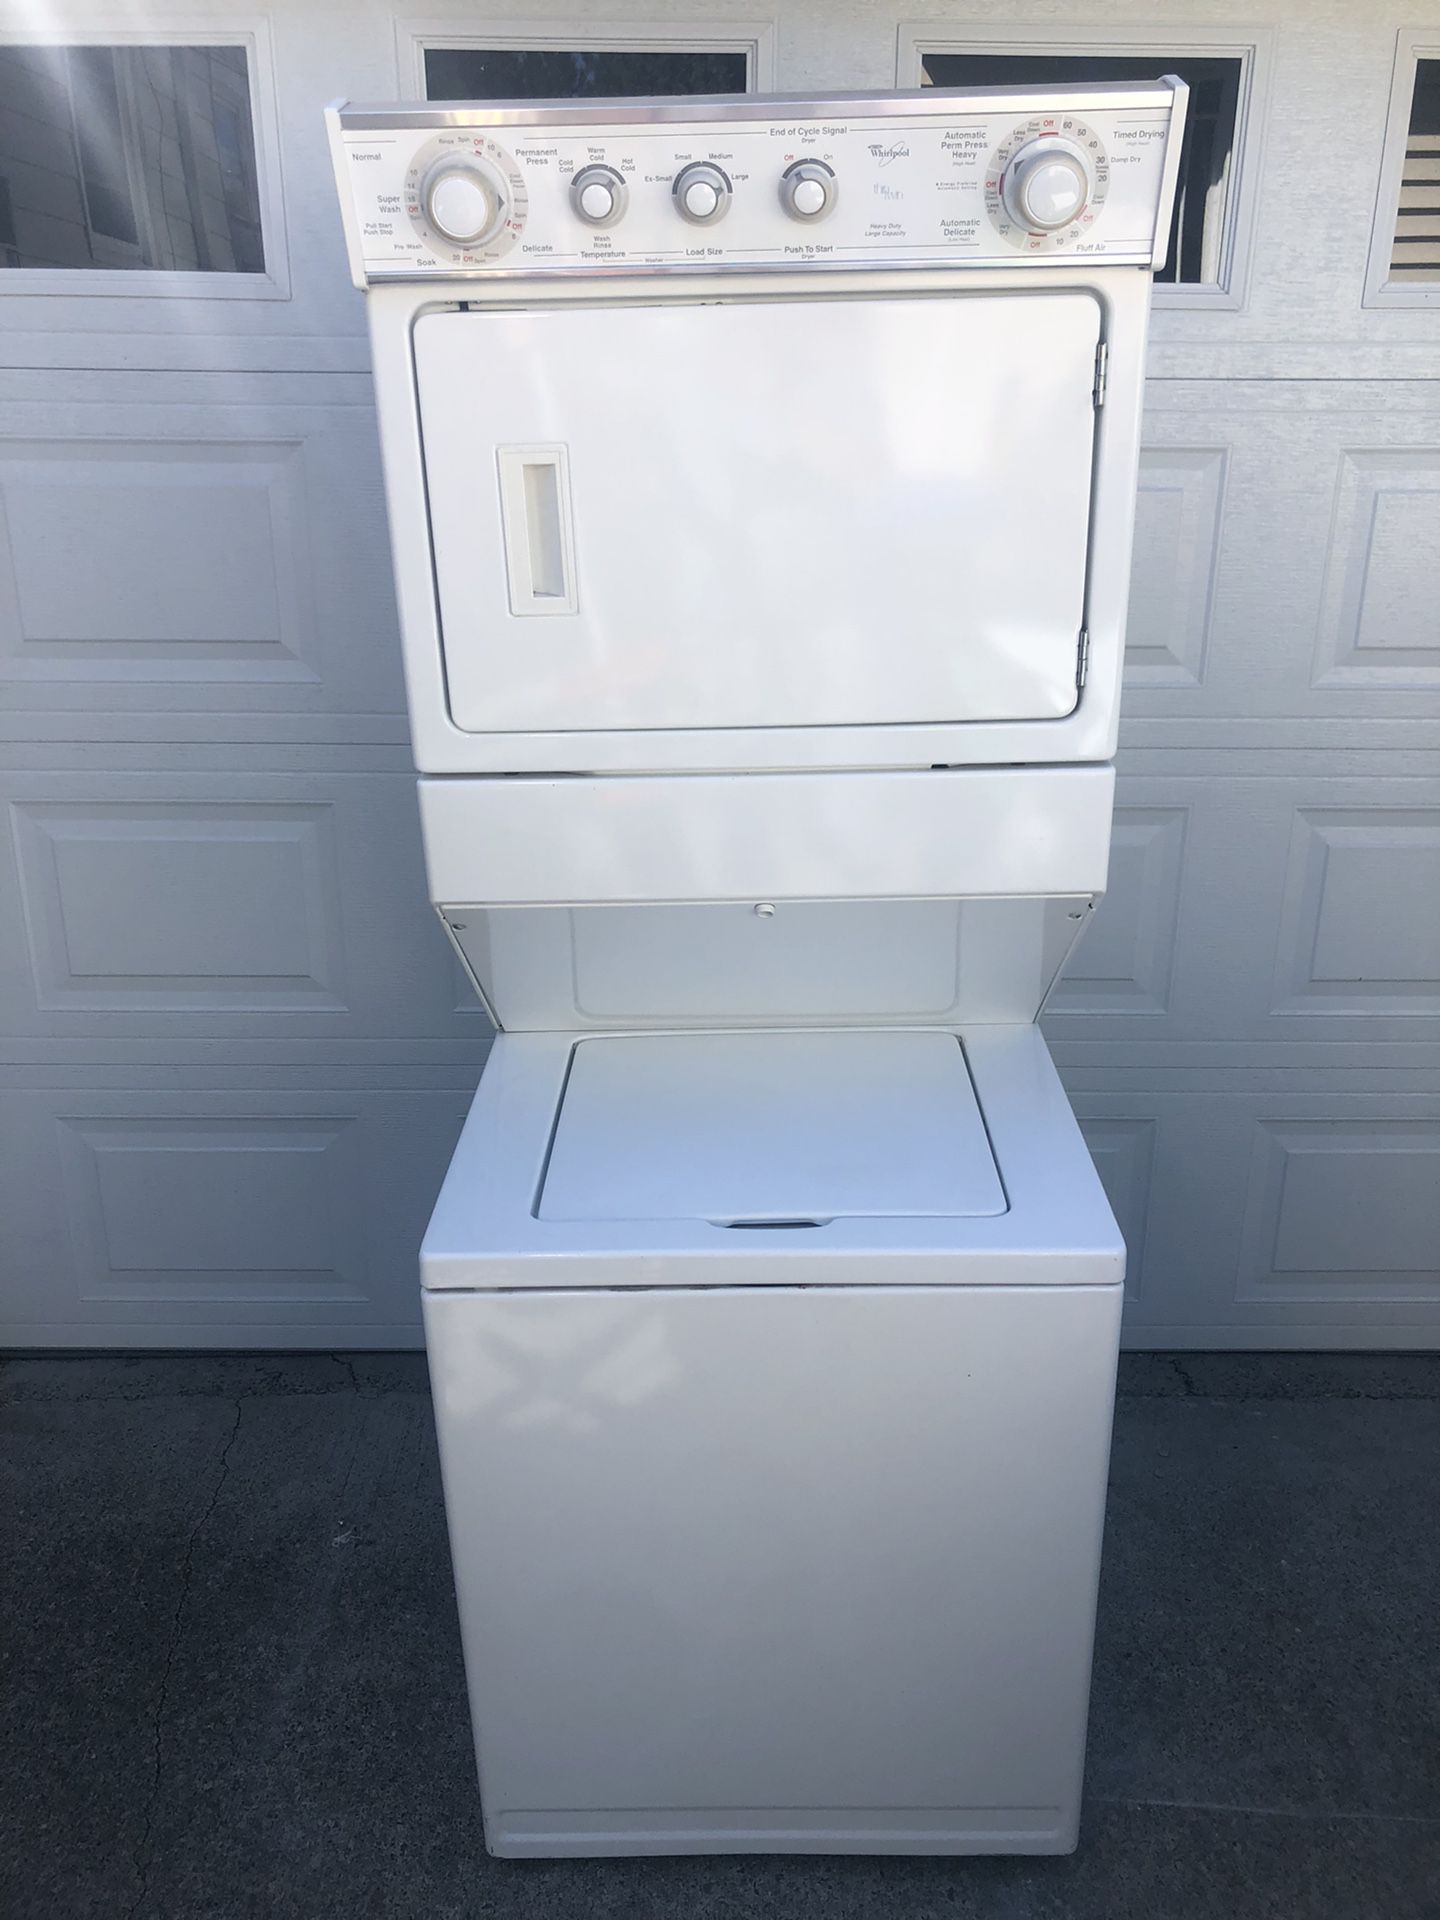 27” Wide - Whirlpool Laundry Center Washer Dryer 